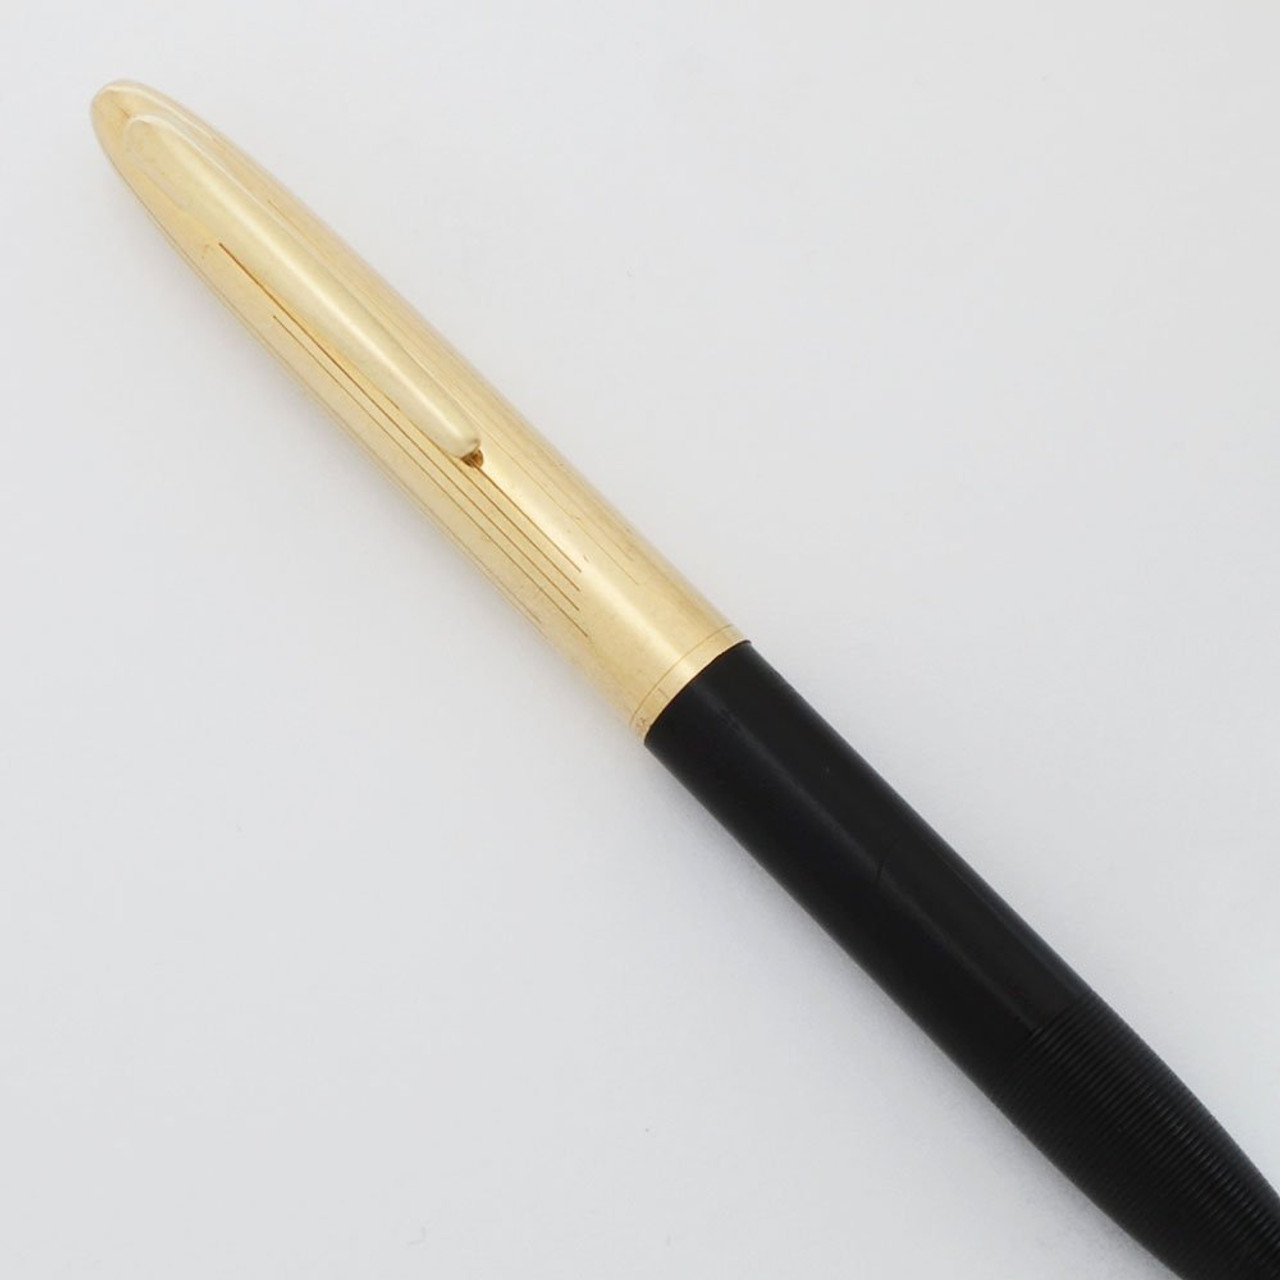 Sheaffer Crest Deluxe 600 Mechanical Pencil - Black, Gold Cap, .9mm Lead (Excellent, Works Well)